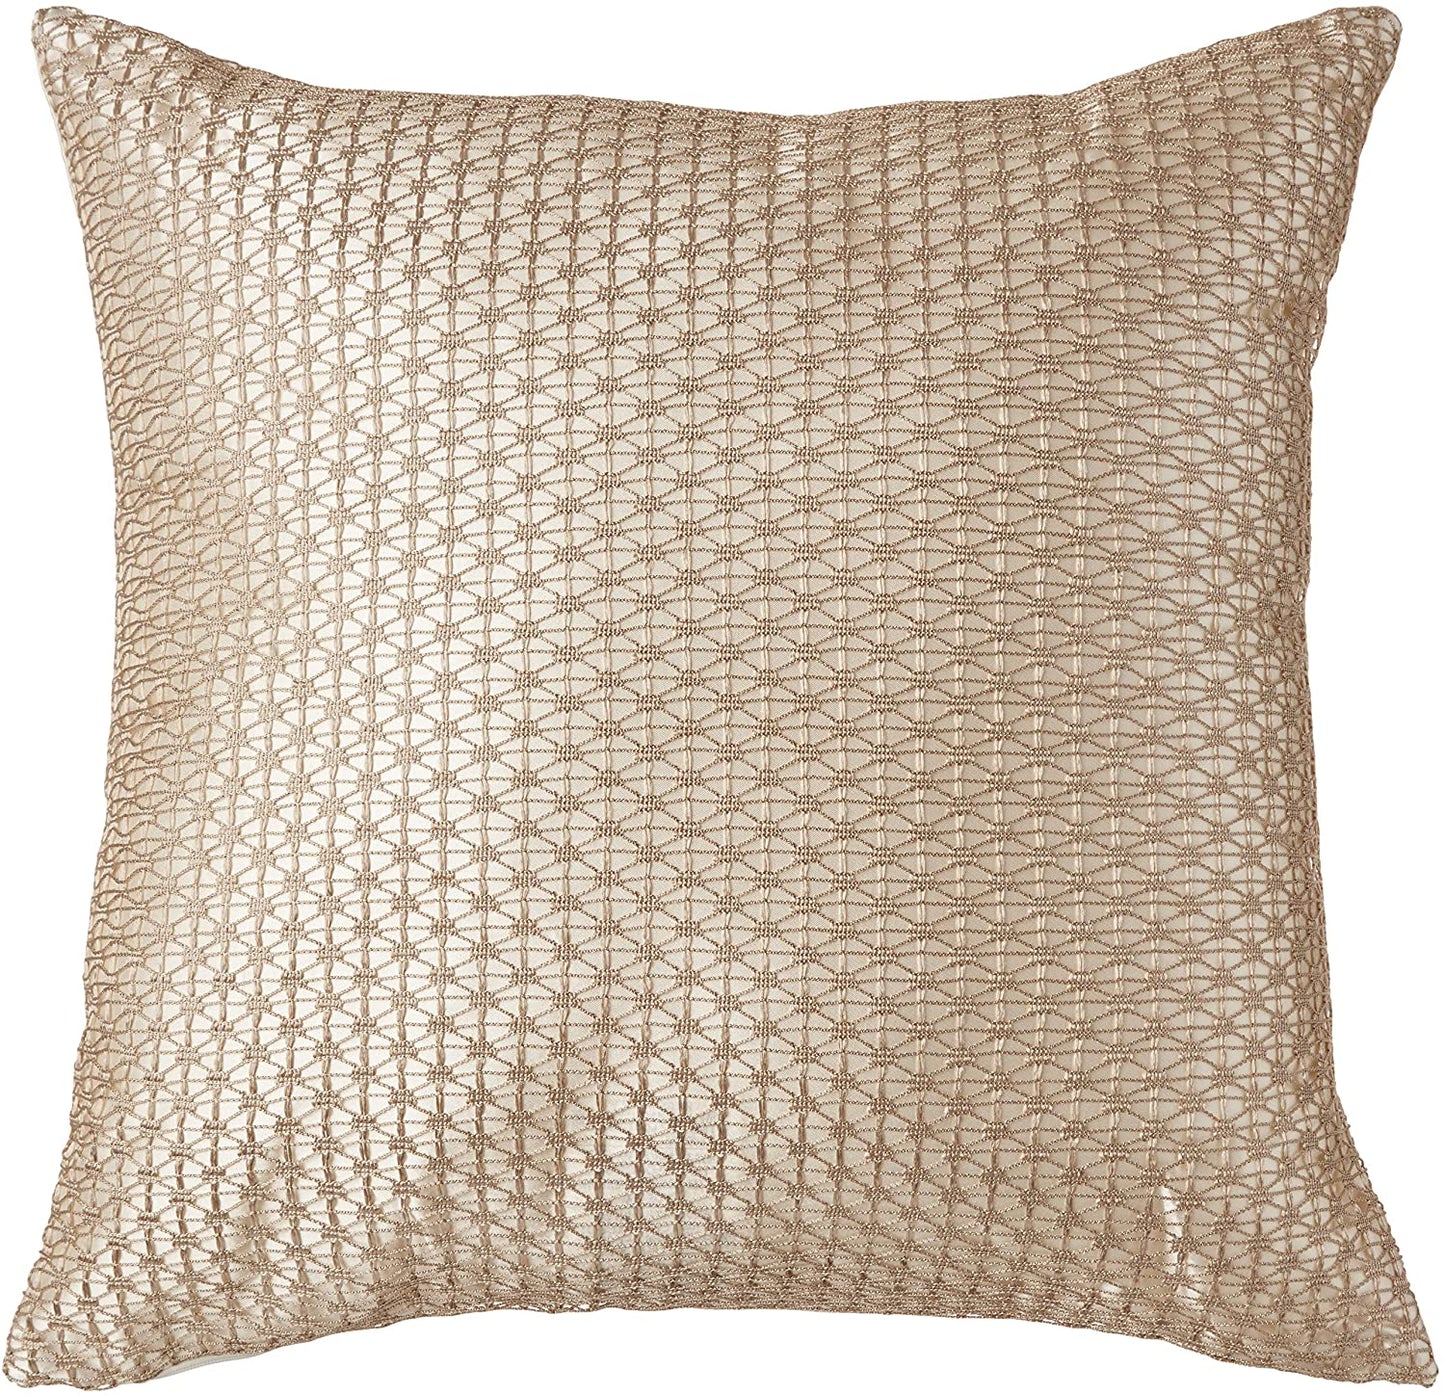 Marvelous Geometric Lace Pattern Decorative Throw Pillow Cover